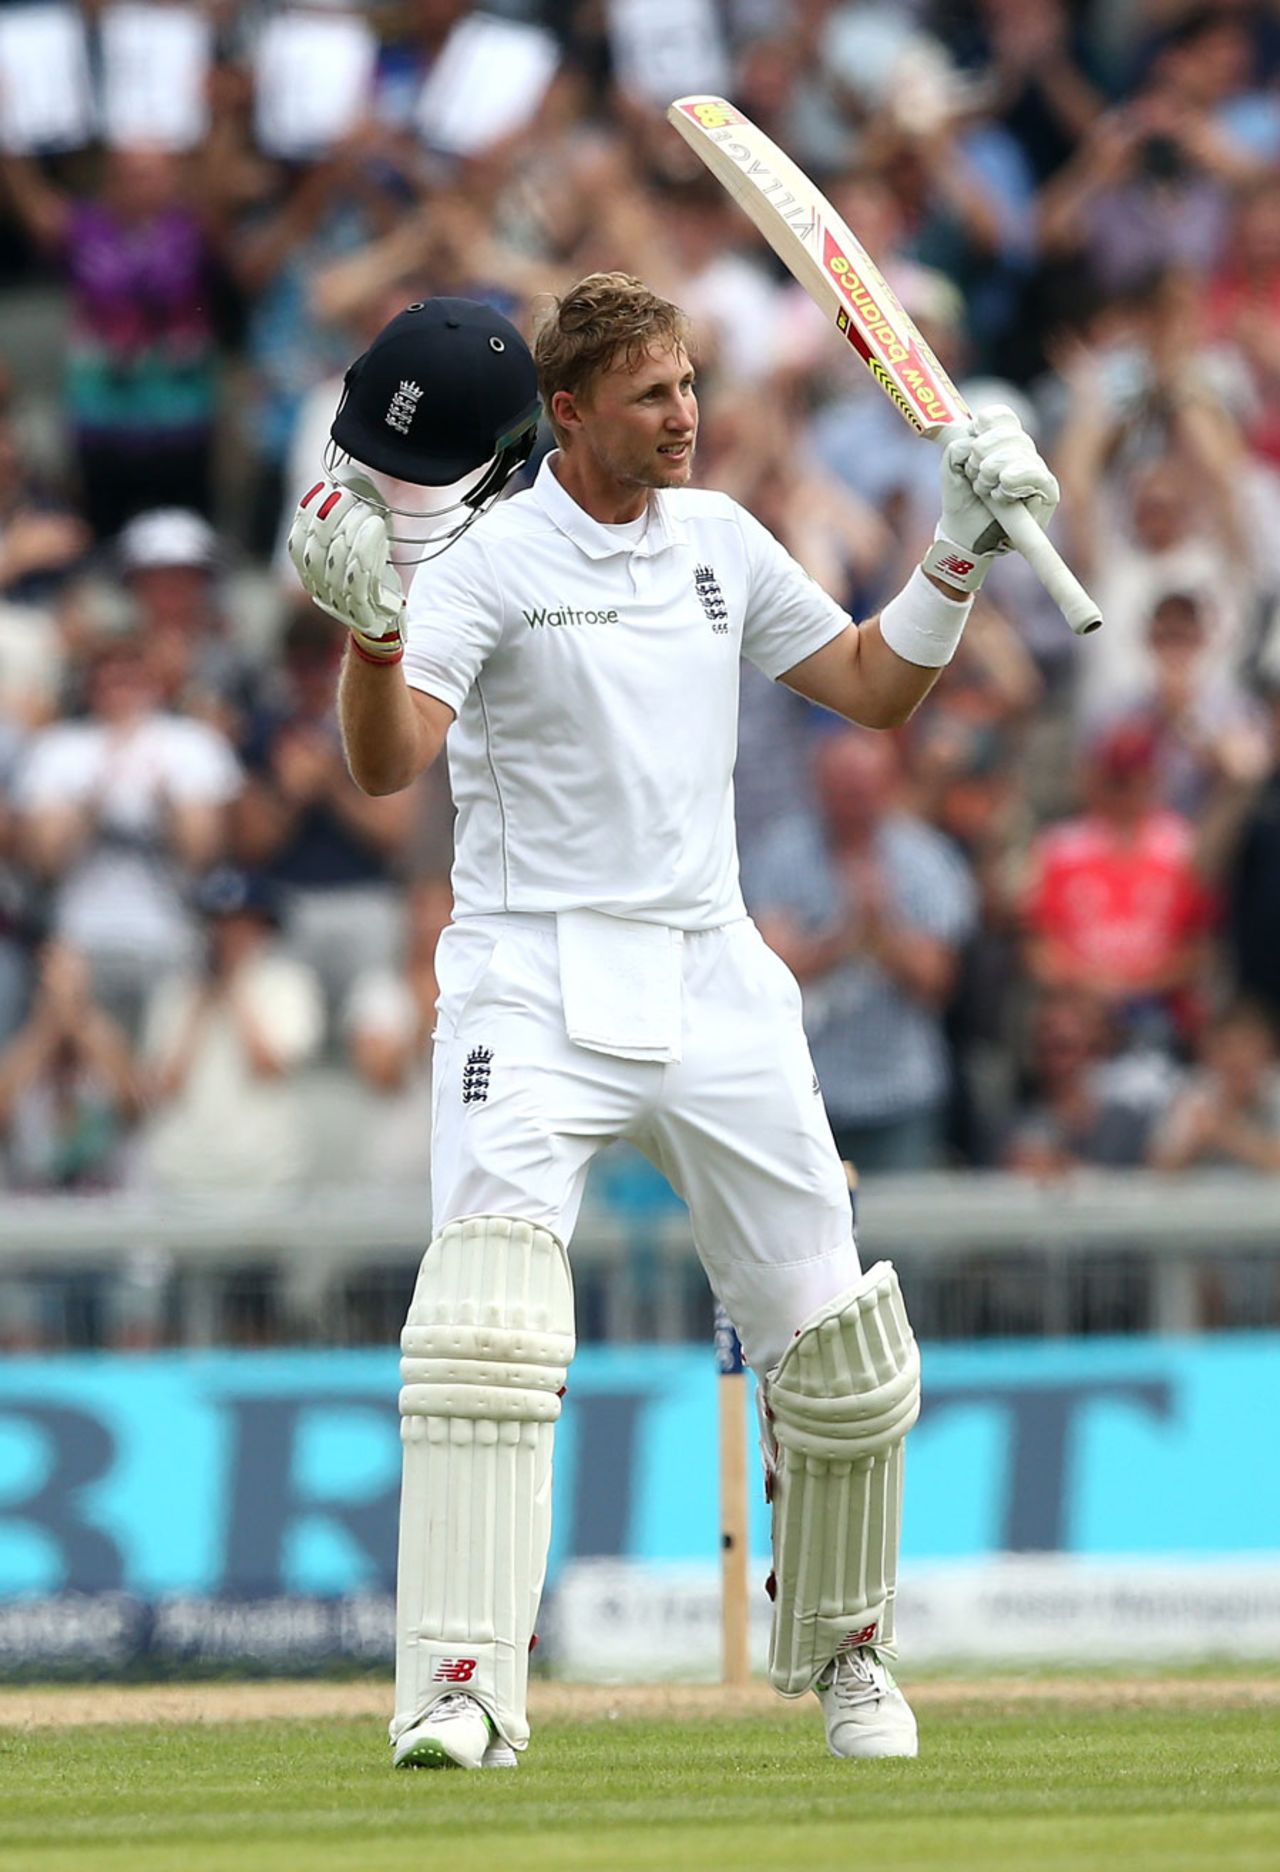 Joe Root salutes the crowd after bringing up his second Test double-century, England v Pakistan, 2nd Investec Test, Old Trafford, 2nd day, July 23, 2016